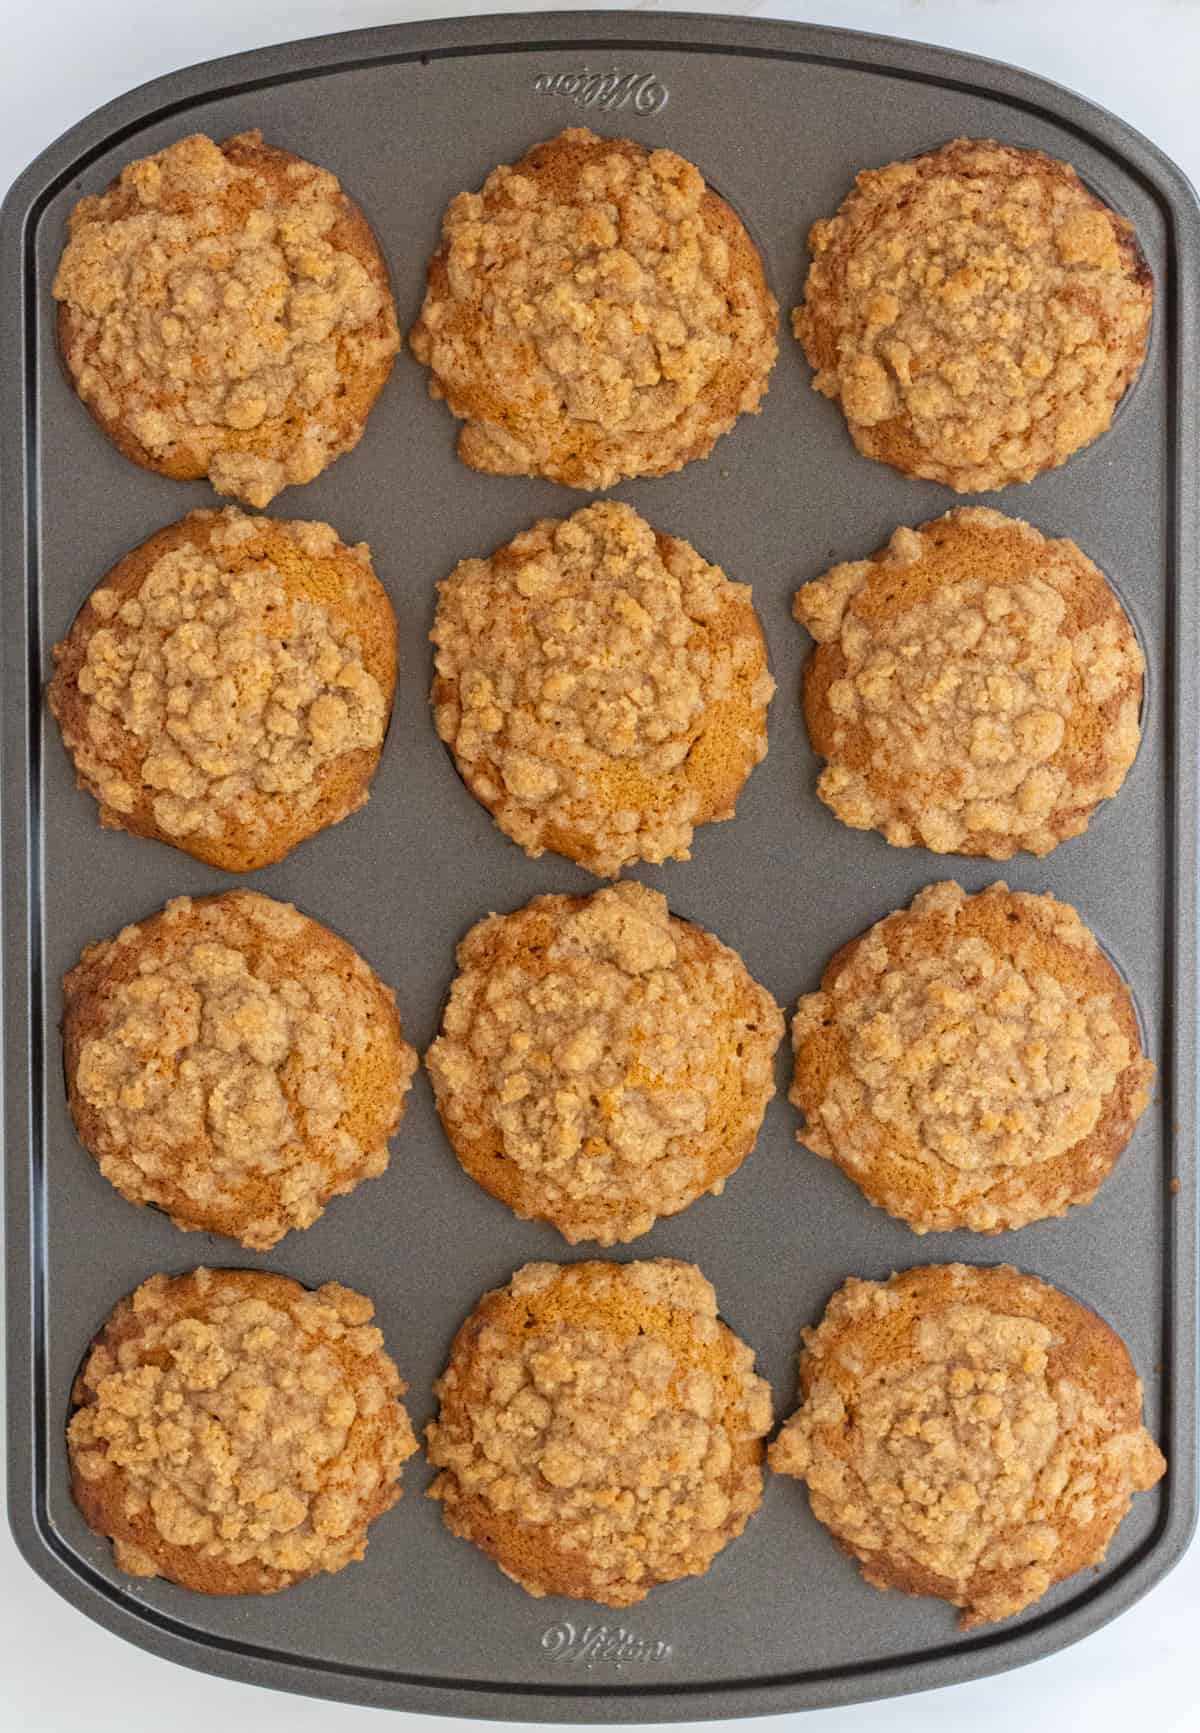 Baked cinnamon streusel muffins in a muffin pan.